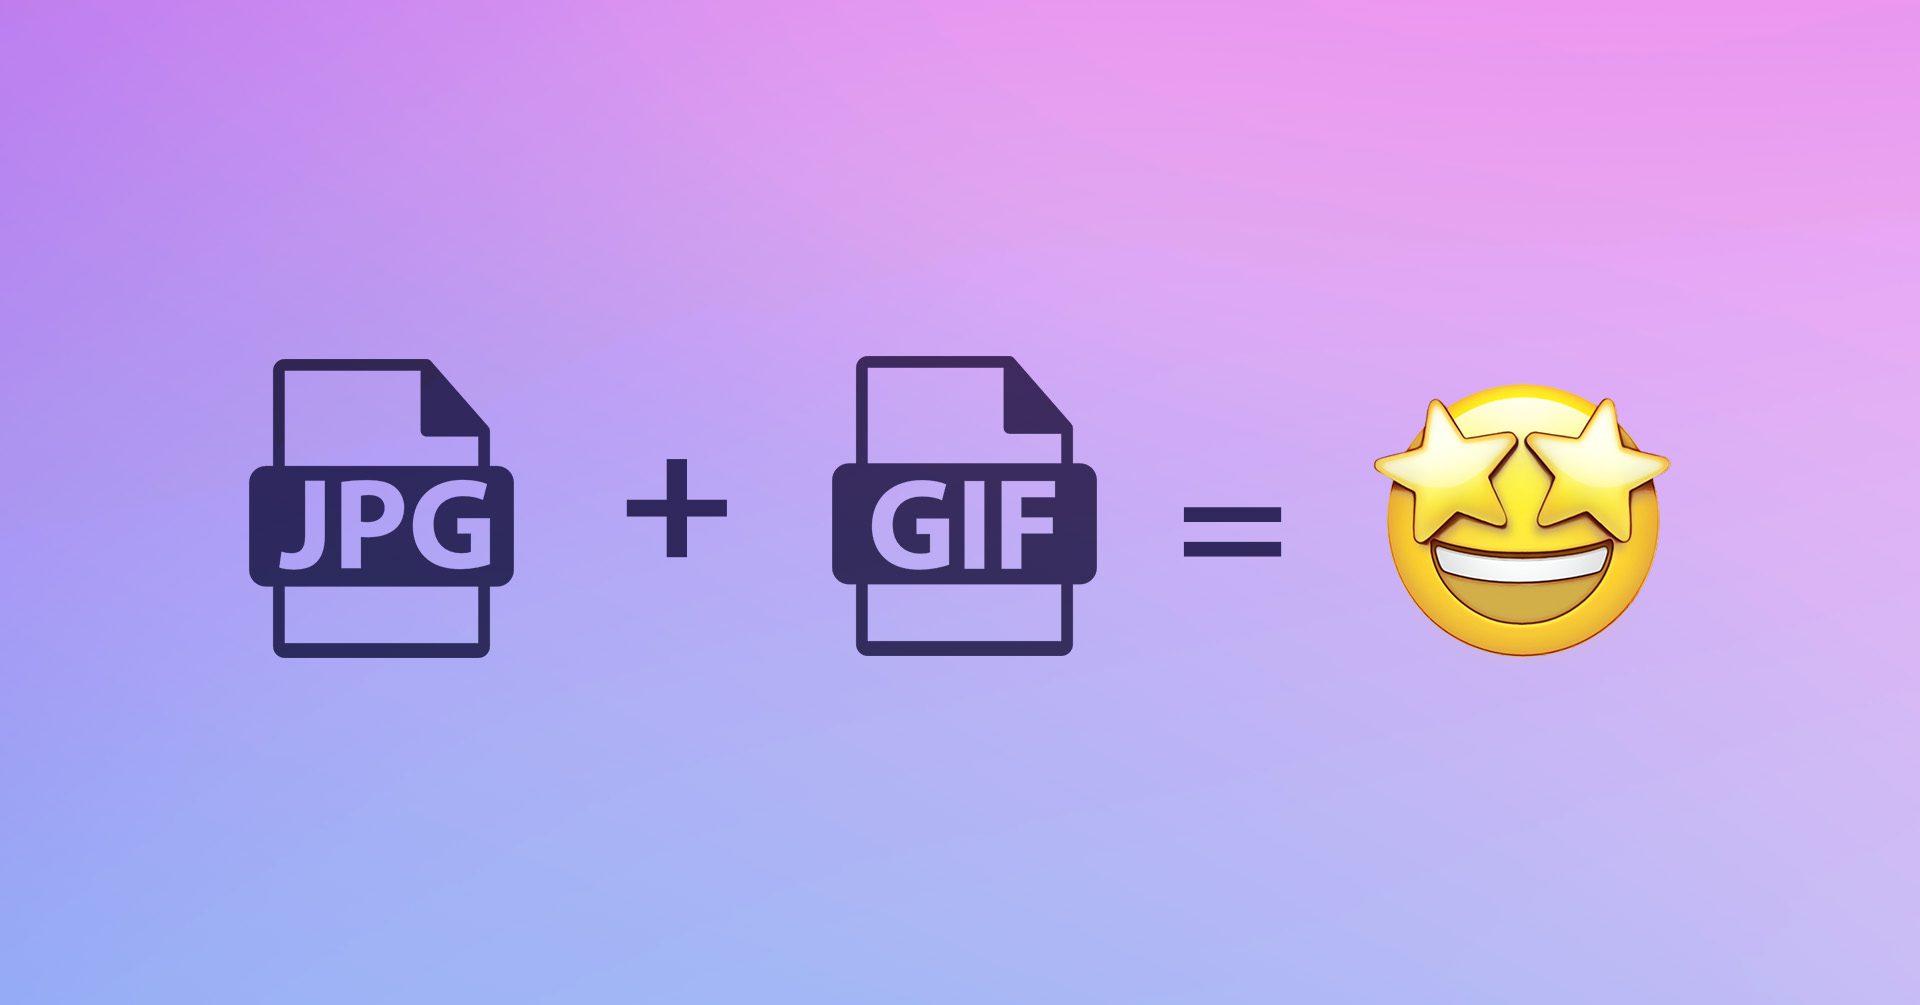 How to download Gif from Pinterest - Lol Gifs